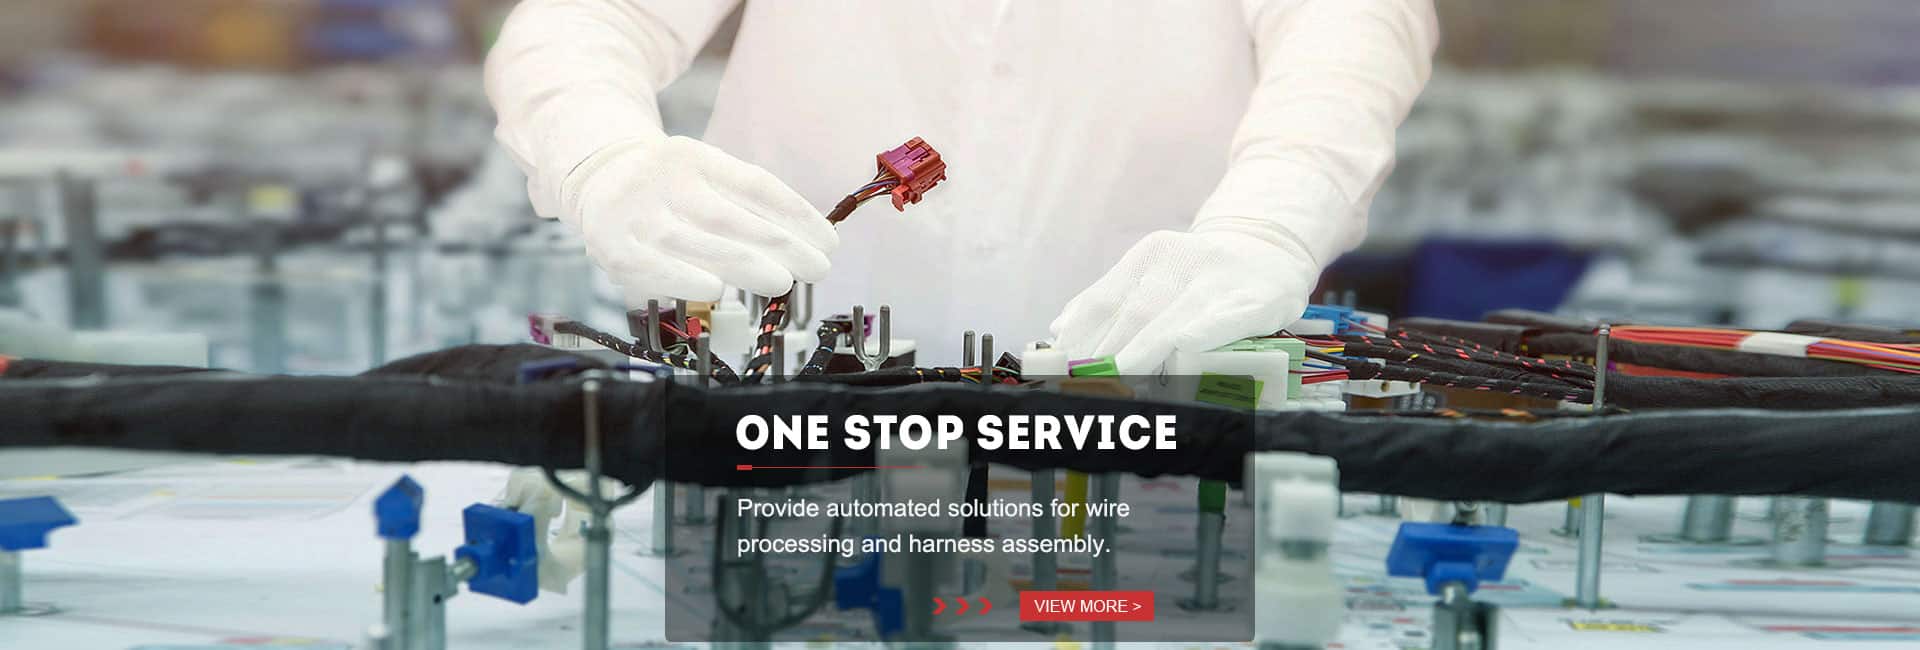 WIREPRO AUTOMATION TECHNOLOGY website picture